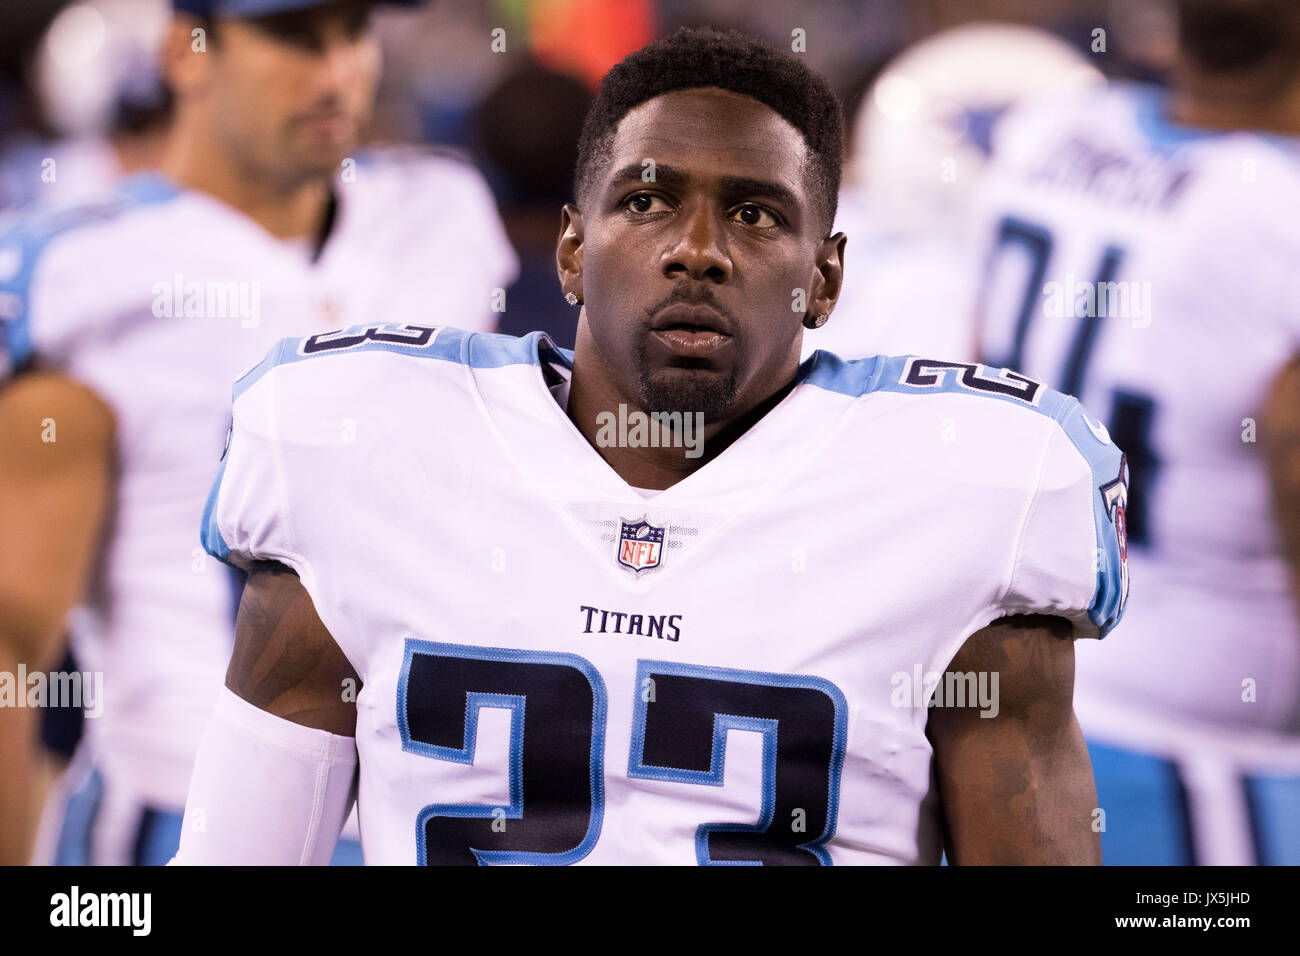 August 12, 2017, Tennessee Titans cornerback Brice McCain (23) looks on  during NFL preseason game between the Tennessee Titans and the New York  Jets at MetLife Stadium in East Rutherford, New Jersey.